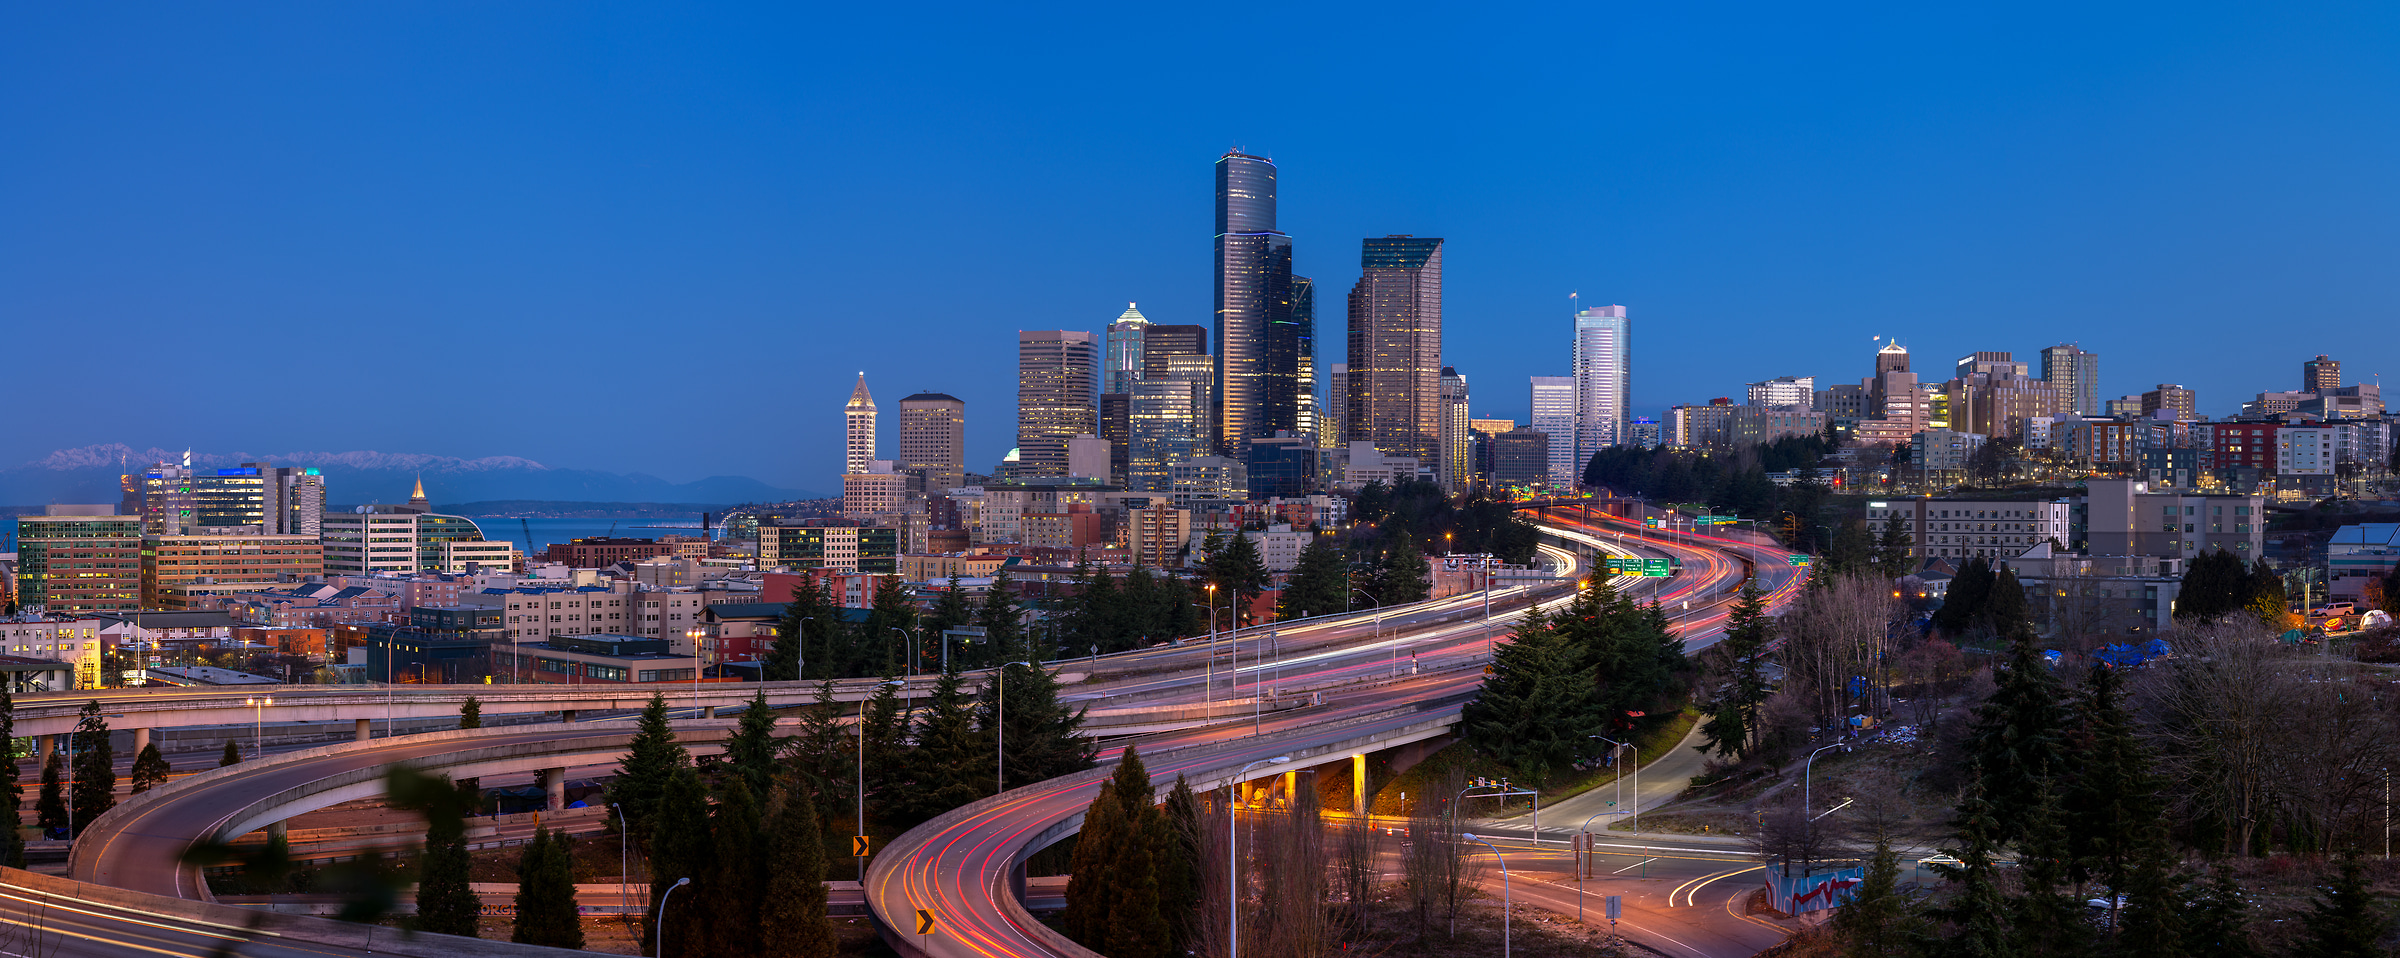 253 megapixels! A very high resolution, large-format VAST photo print of the Seattle skyline in the morning with highways in the foreground; photograph created by Greg Probst in Seattle, Washington